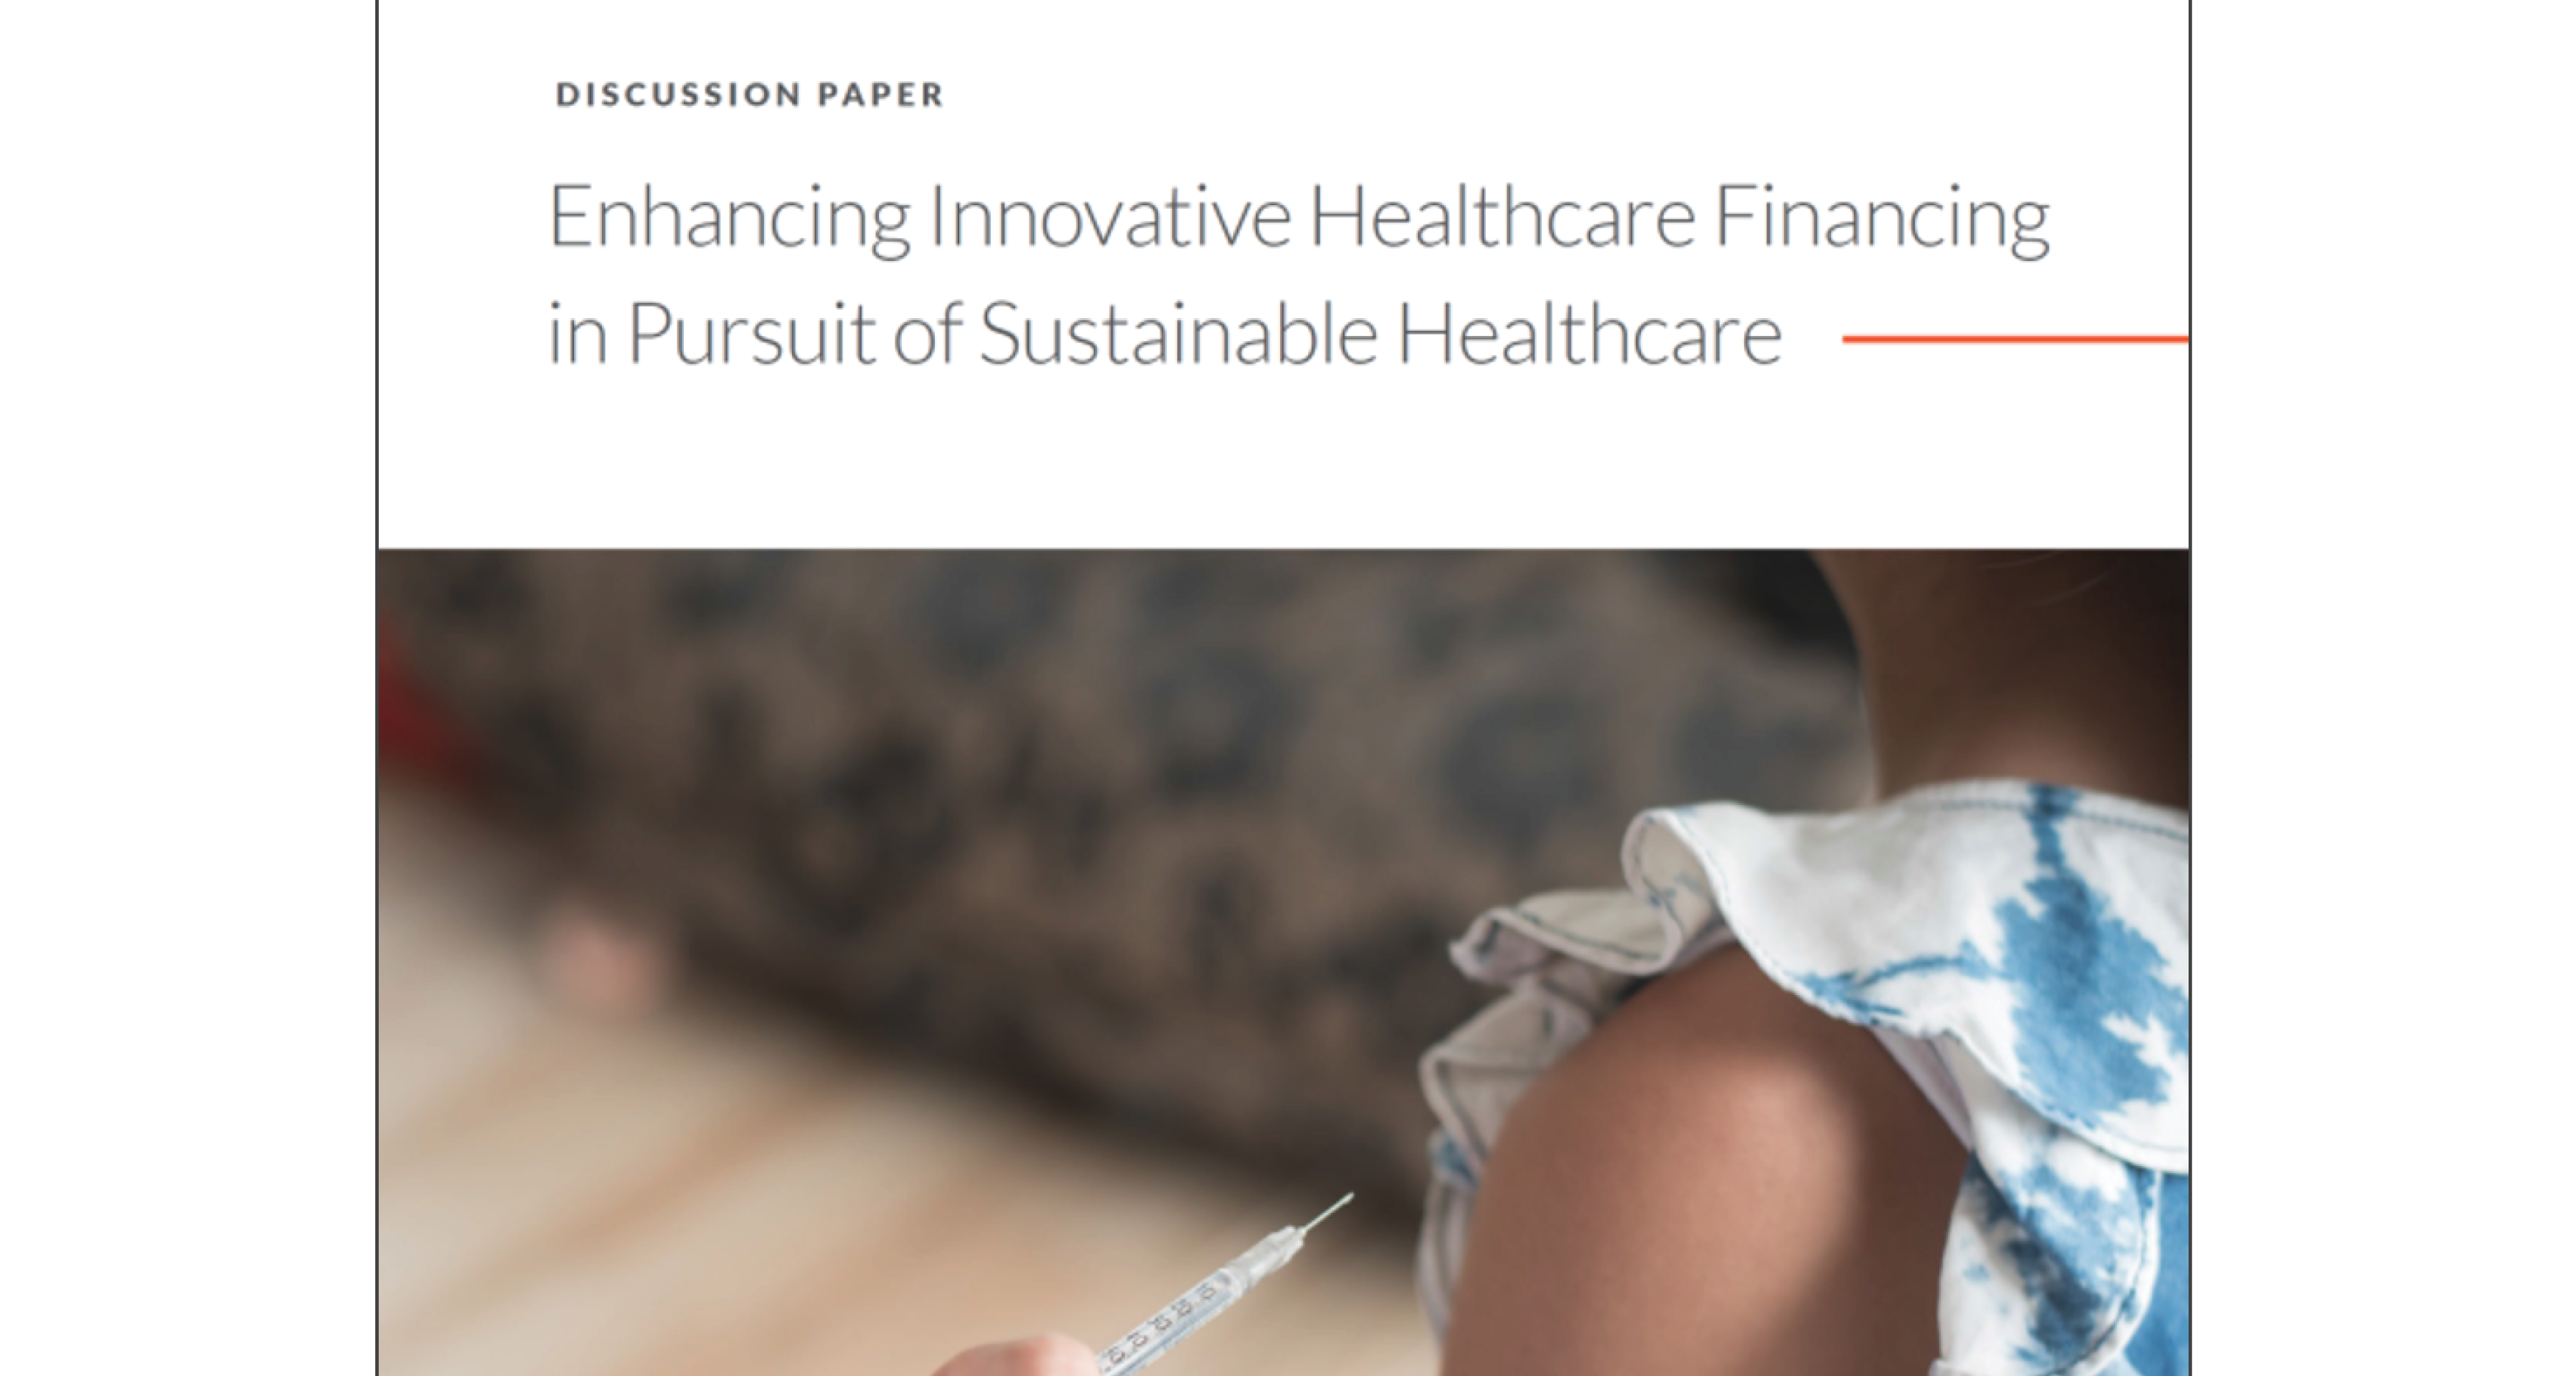 Enhancing Innovative Healthcare Financing in Pursuit of Sustainable Healthcare Discussion Paper